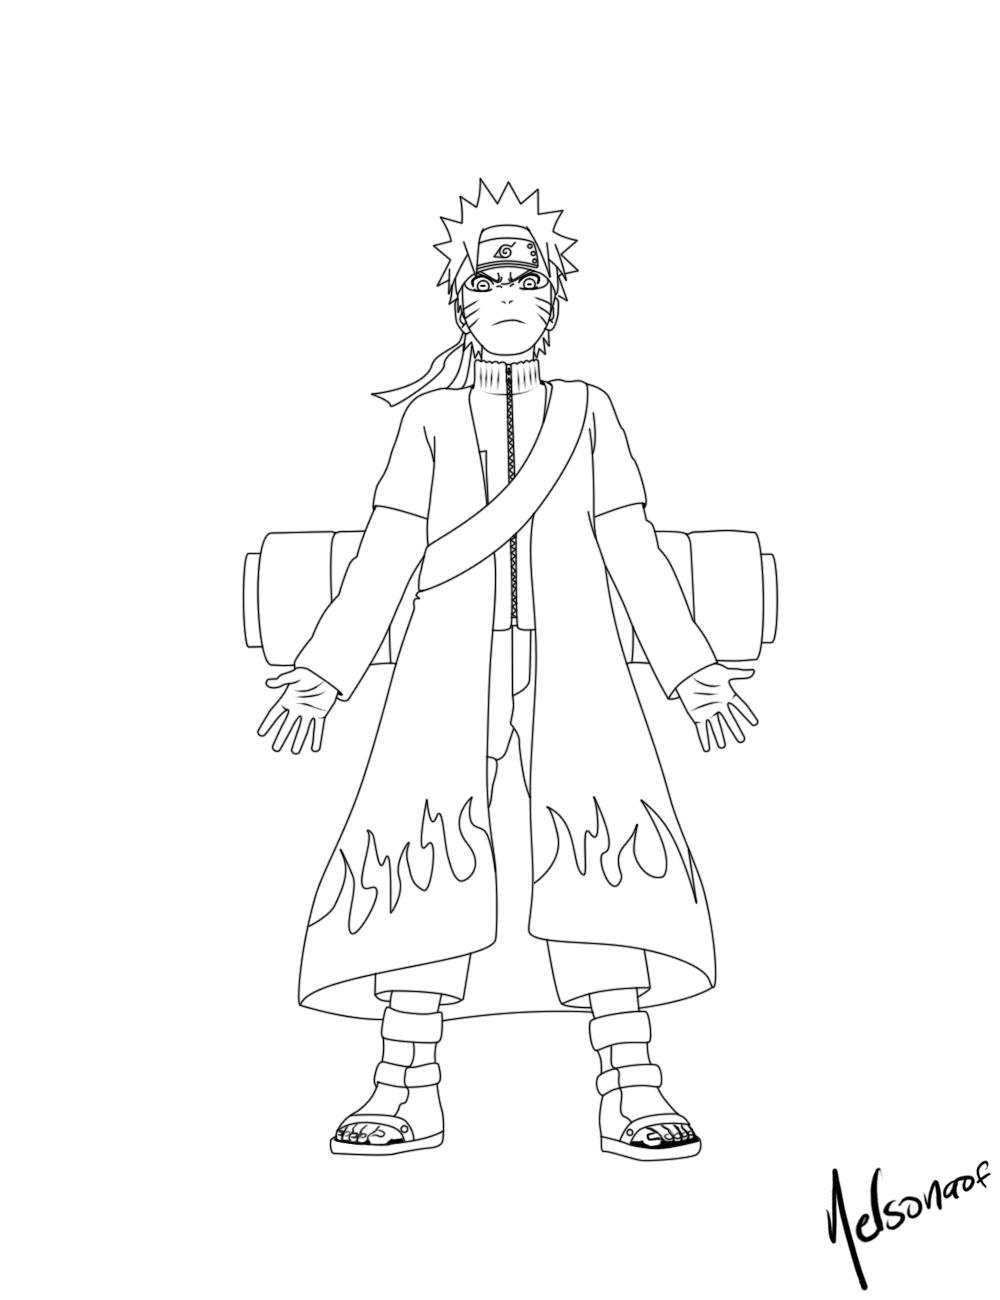 Download Naruto Shippuden Coloring Page - Coloring Home